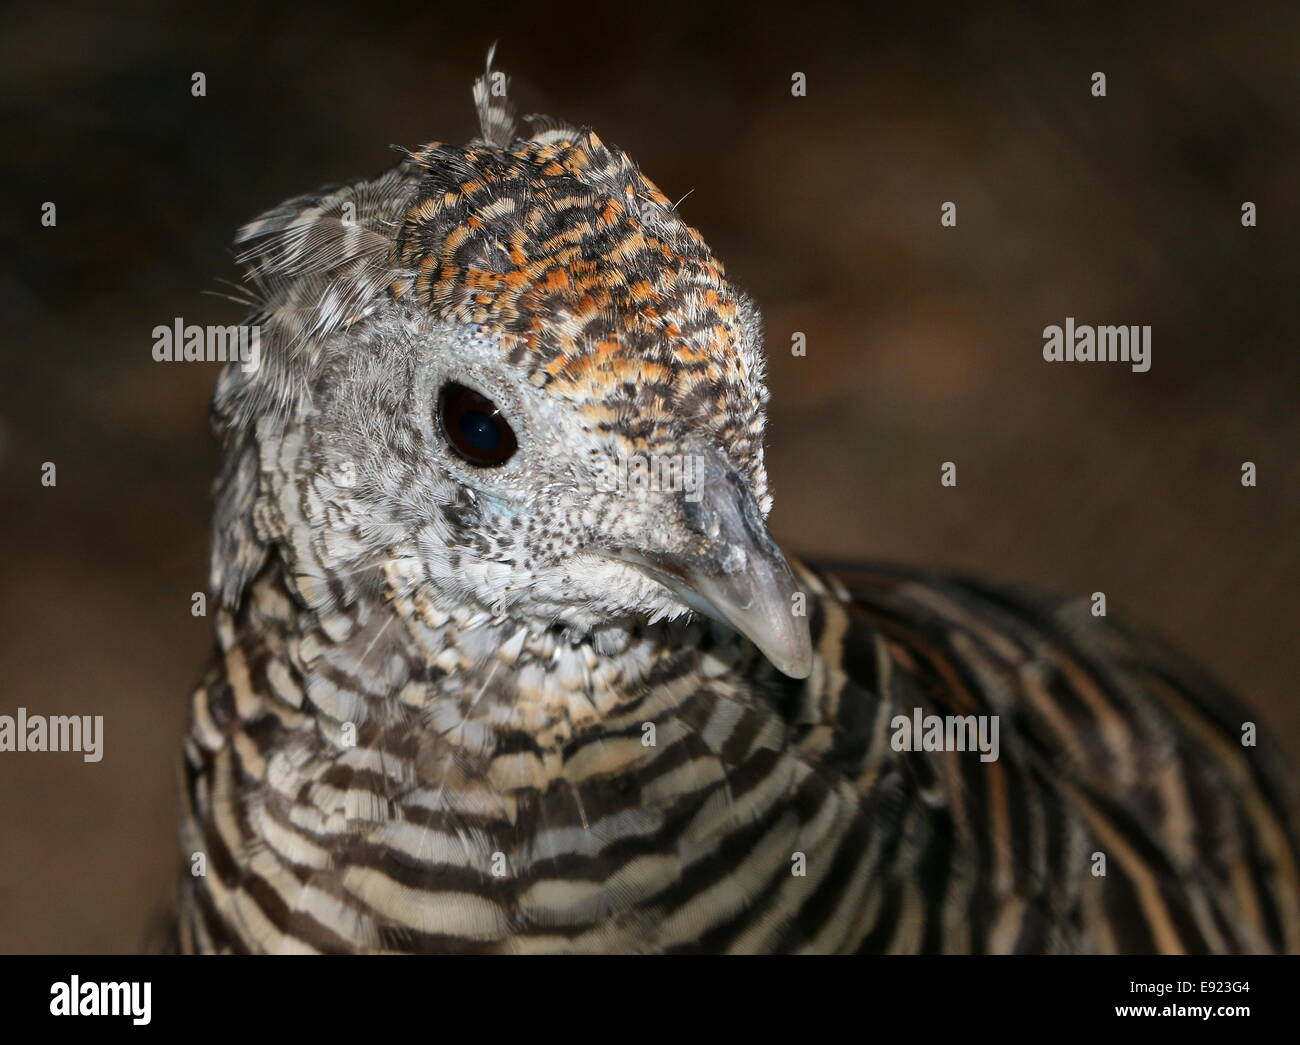 Female Lady Amherst's pheasant (Chrysolophus amherstiae), close-up of the head, originally from Southern Asia Stock Photo